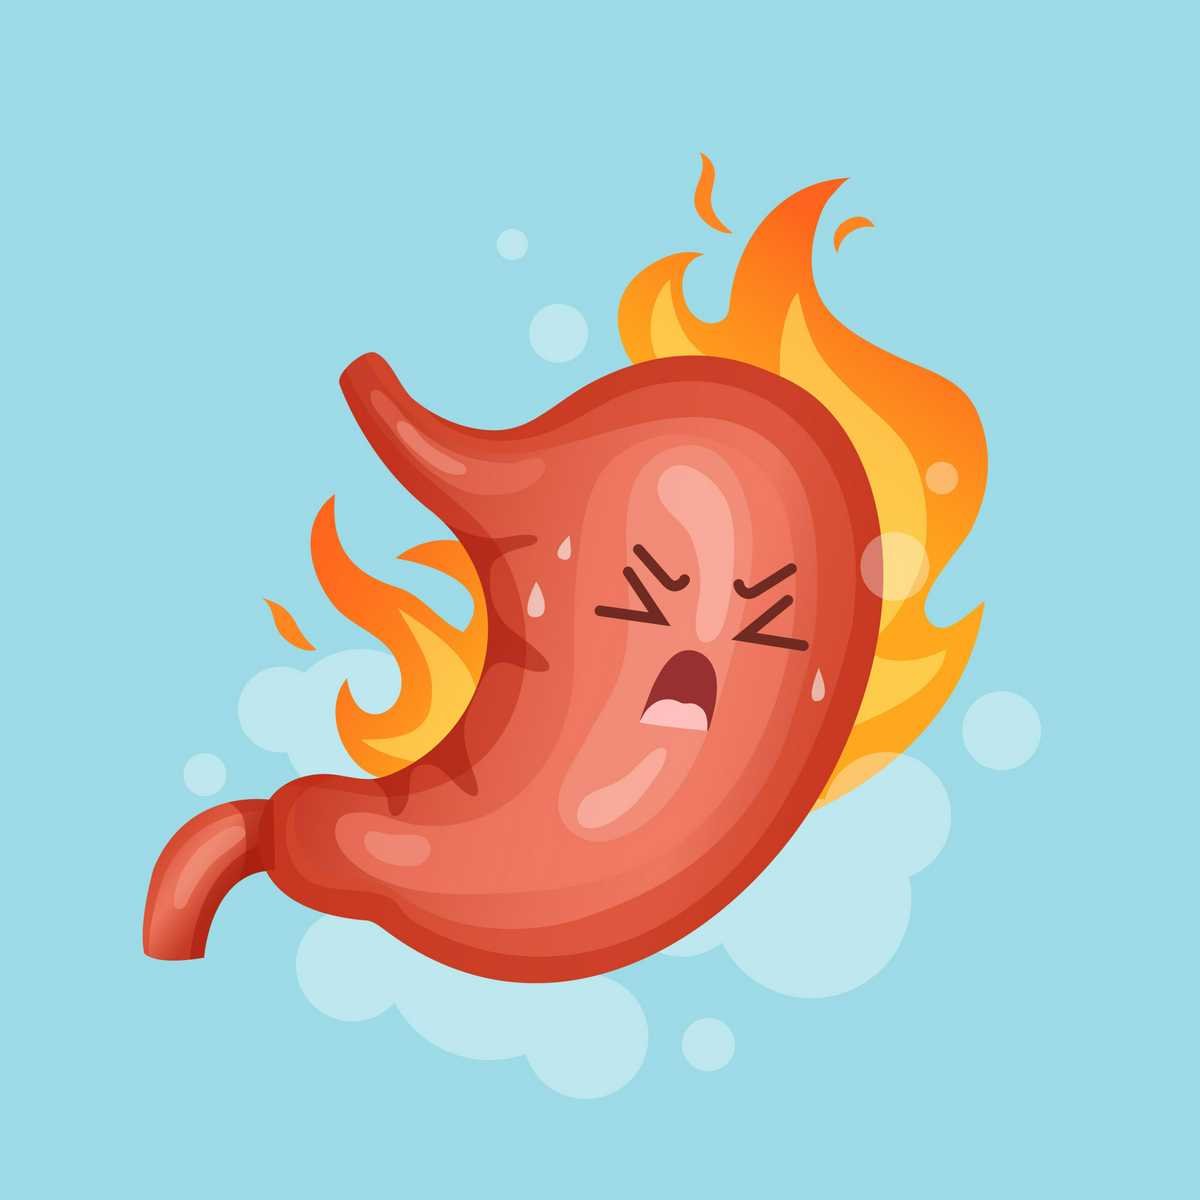 Surgical treatments for Heartburn and Esophageal Reflux